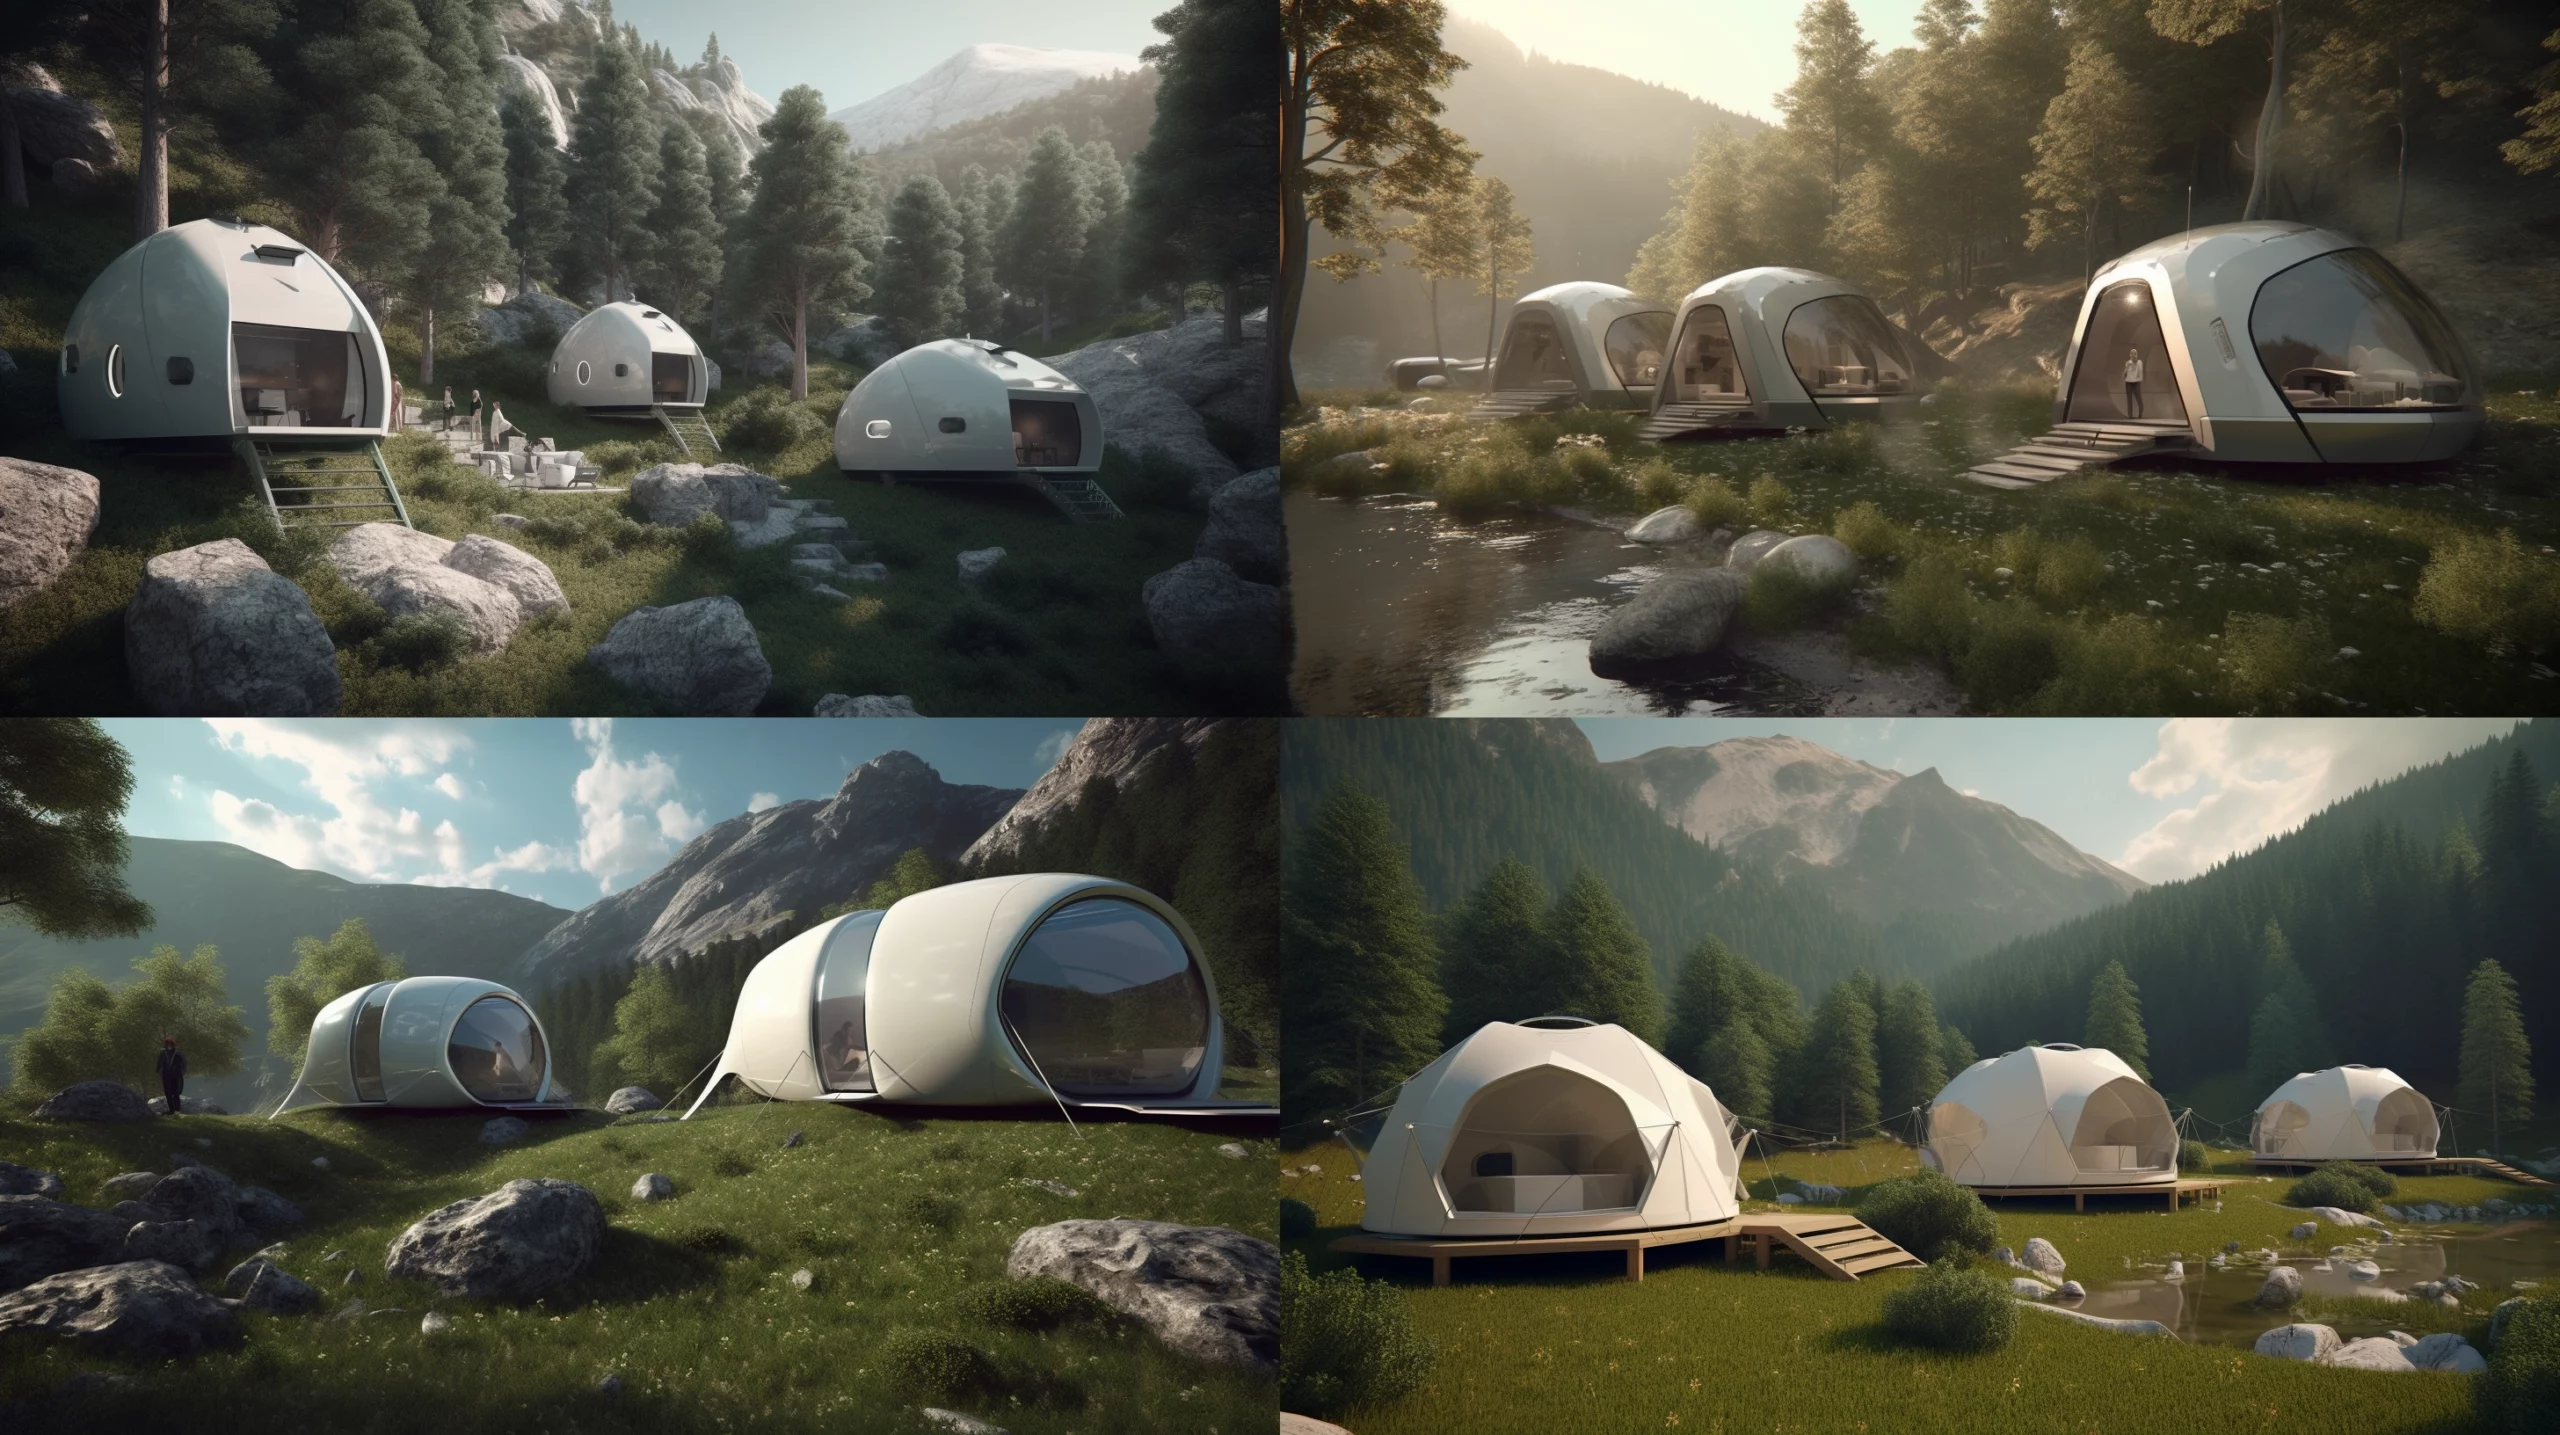 Eco Futuristic Summer Camping Experience Revolutionizing the Industry with Sustainable Technology scaled